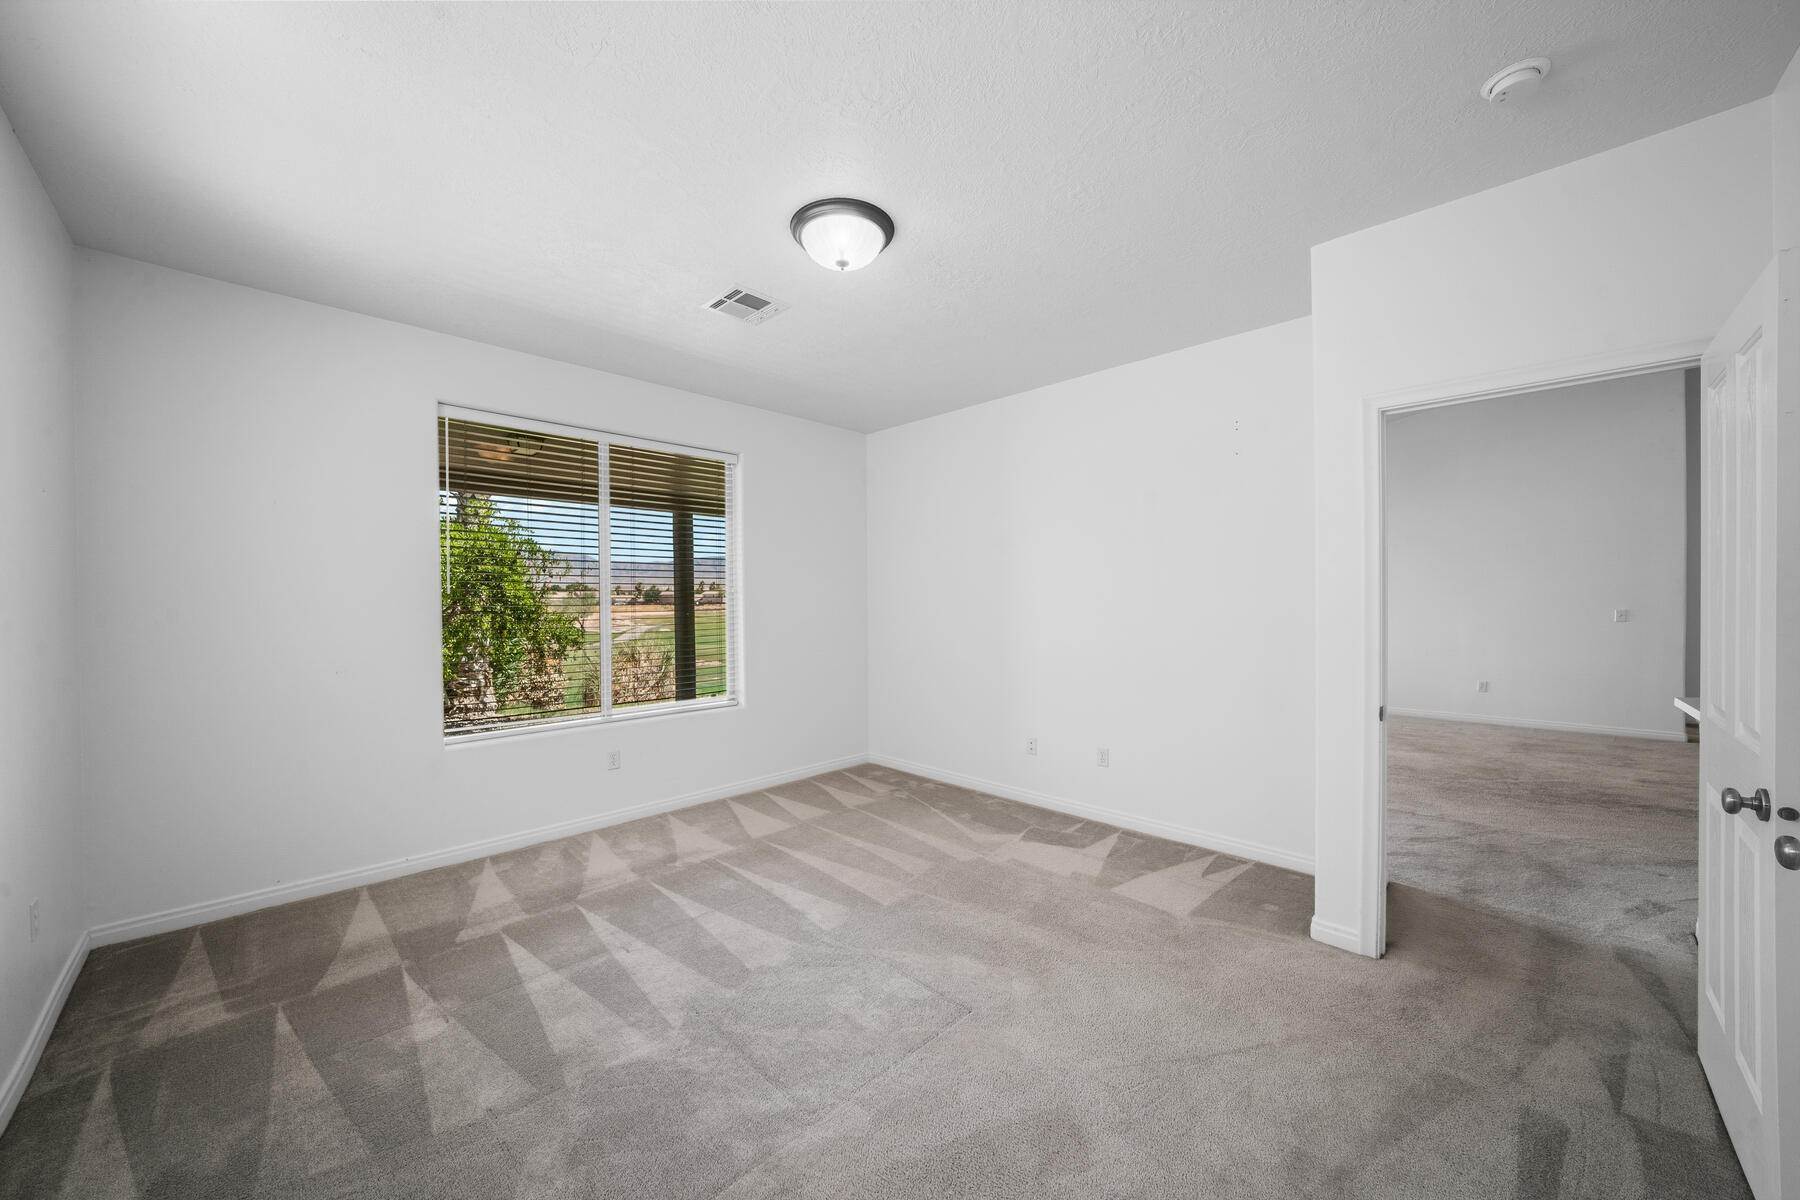 21. Townhouse for Sale at Light, Bright Mesquite Townhome 456 Hagens Alley Mesquite, Nevada 89027 United States